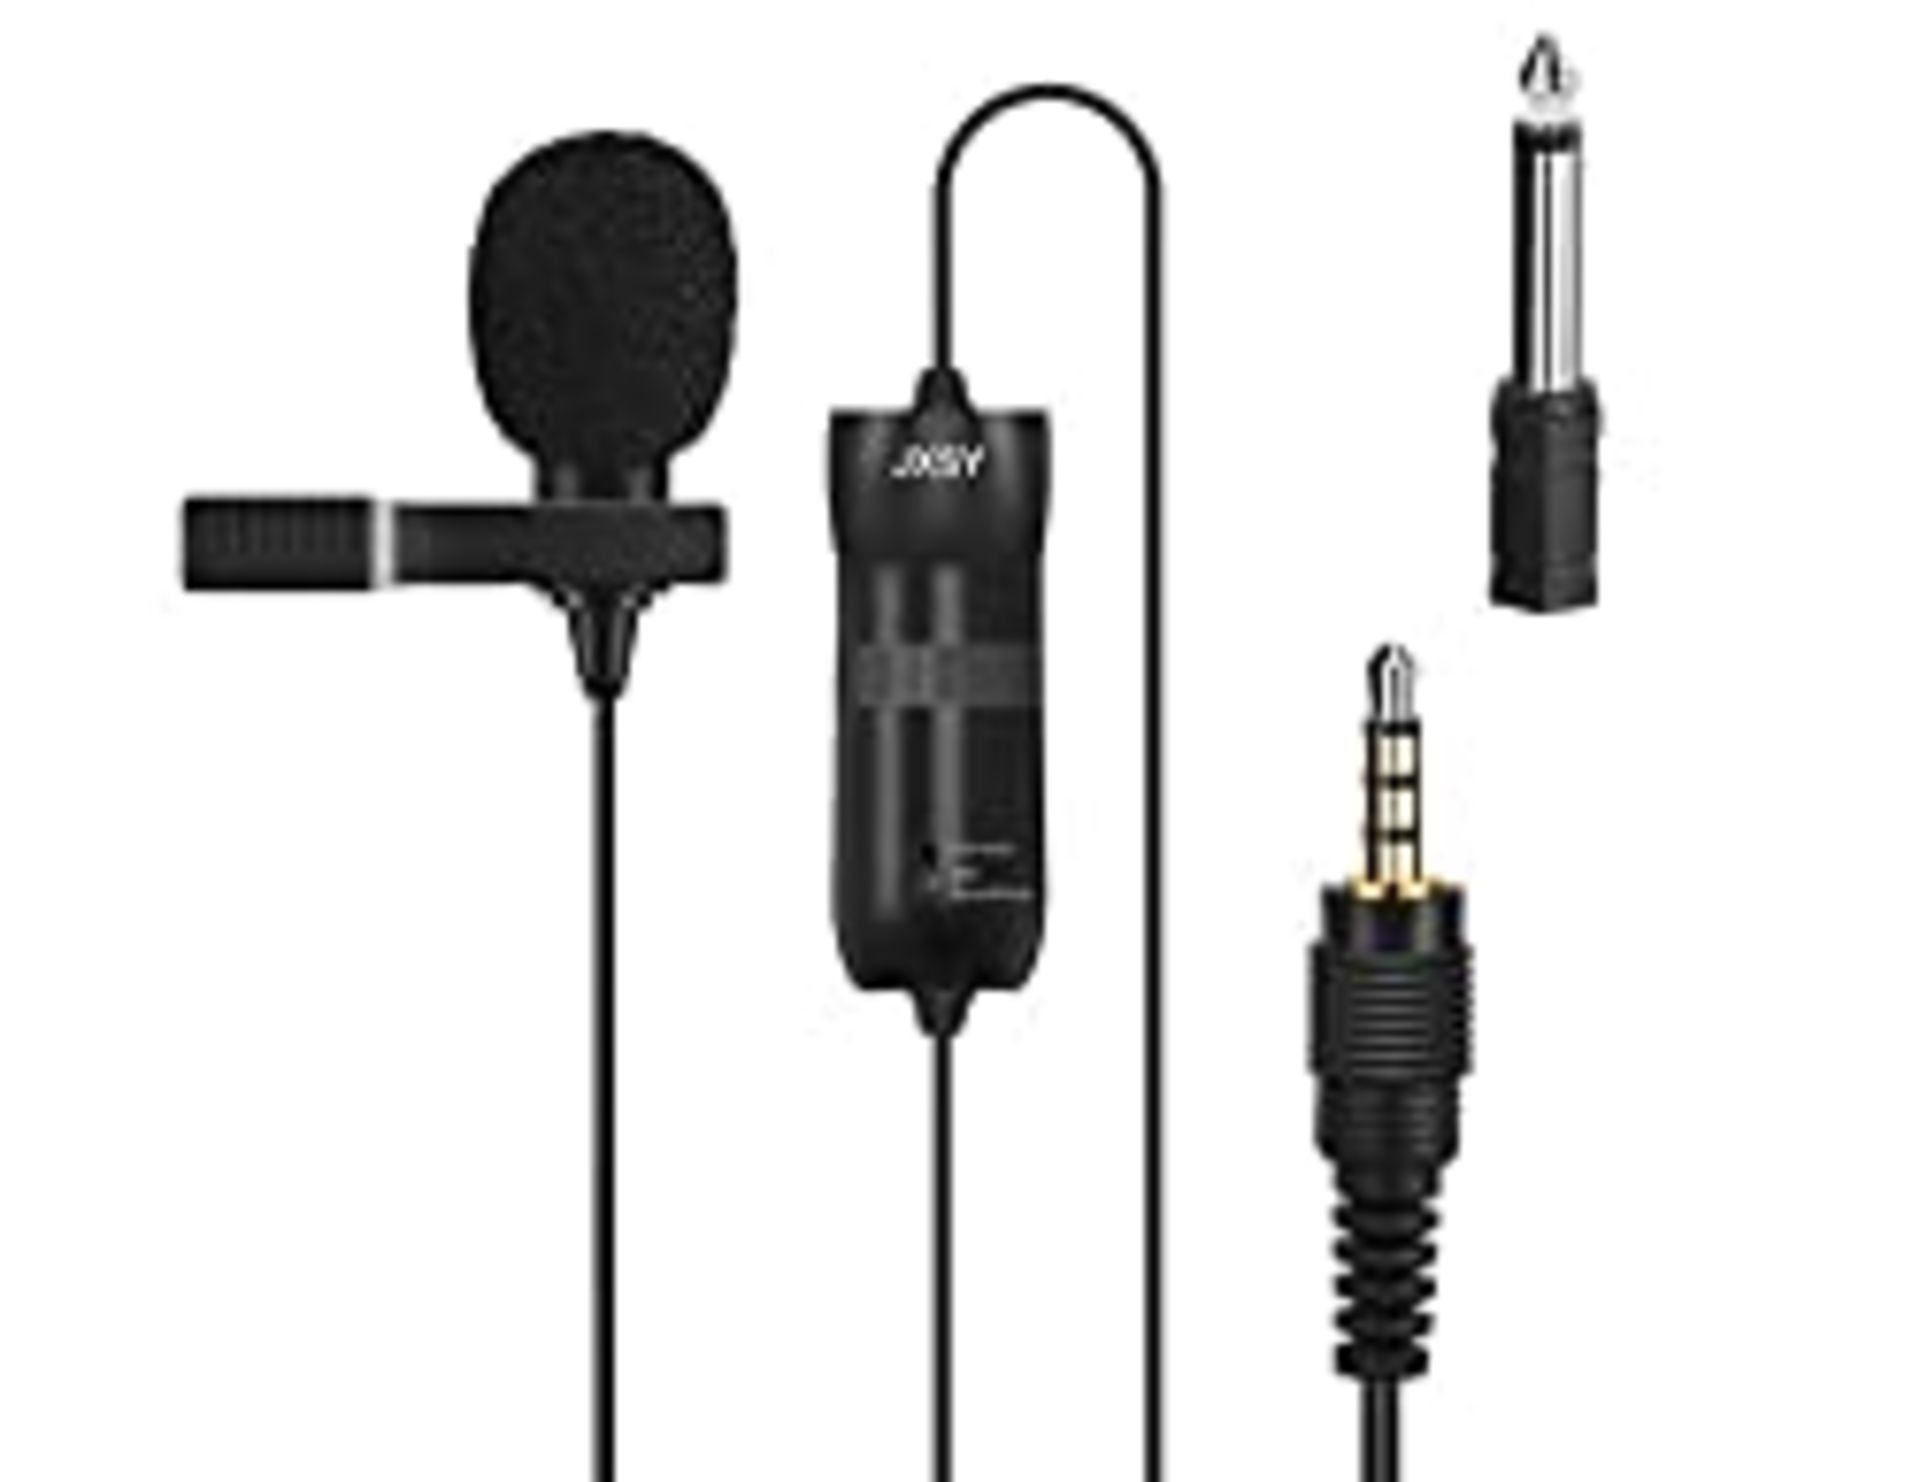 RRP £5.99 superLav Lavalier Microphone - Sound Recording for YouTube